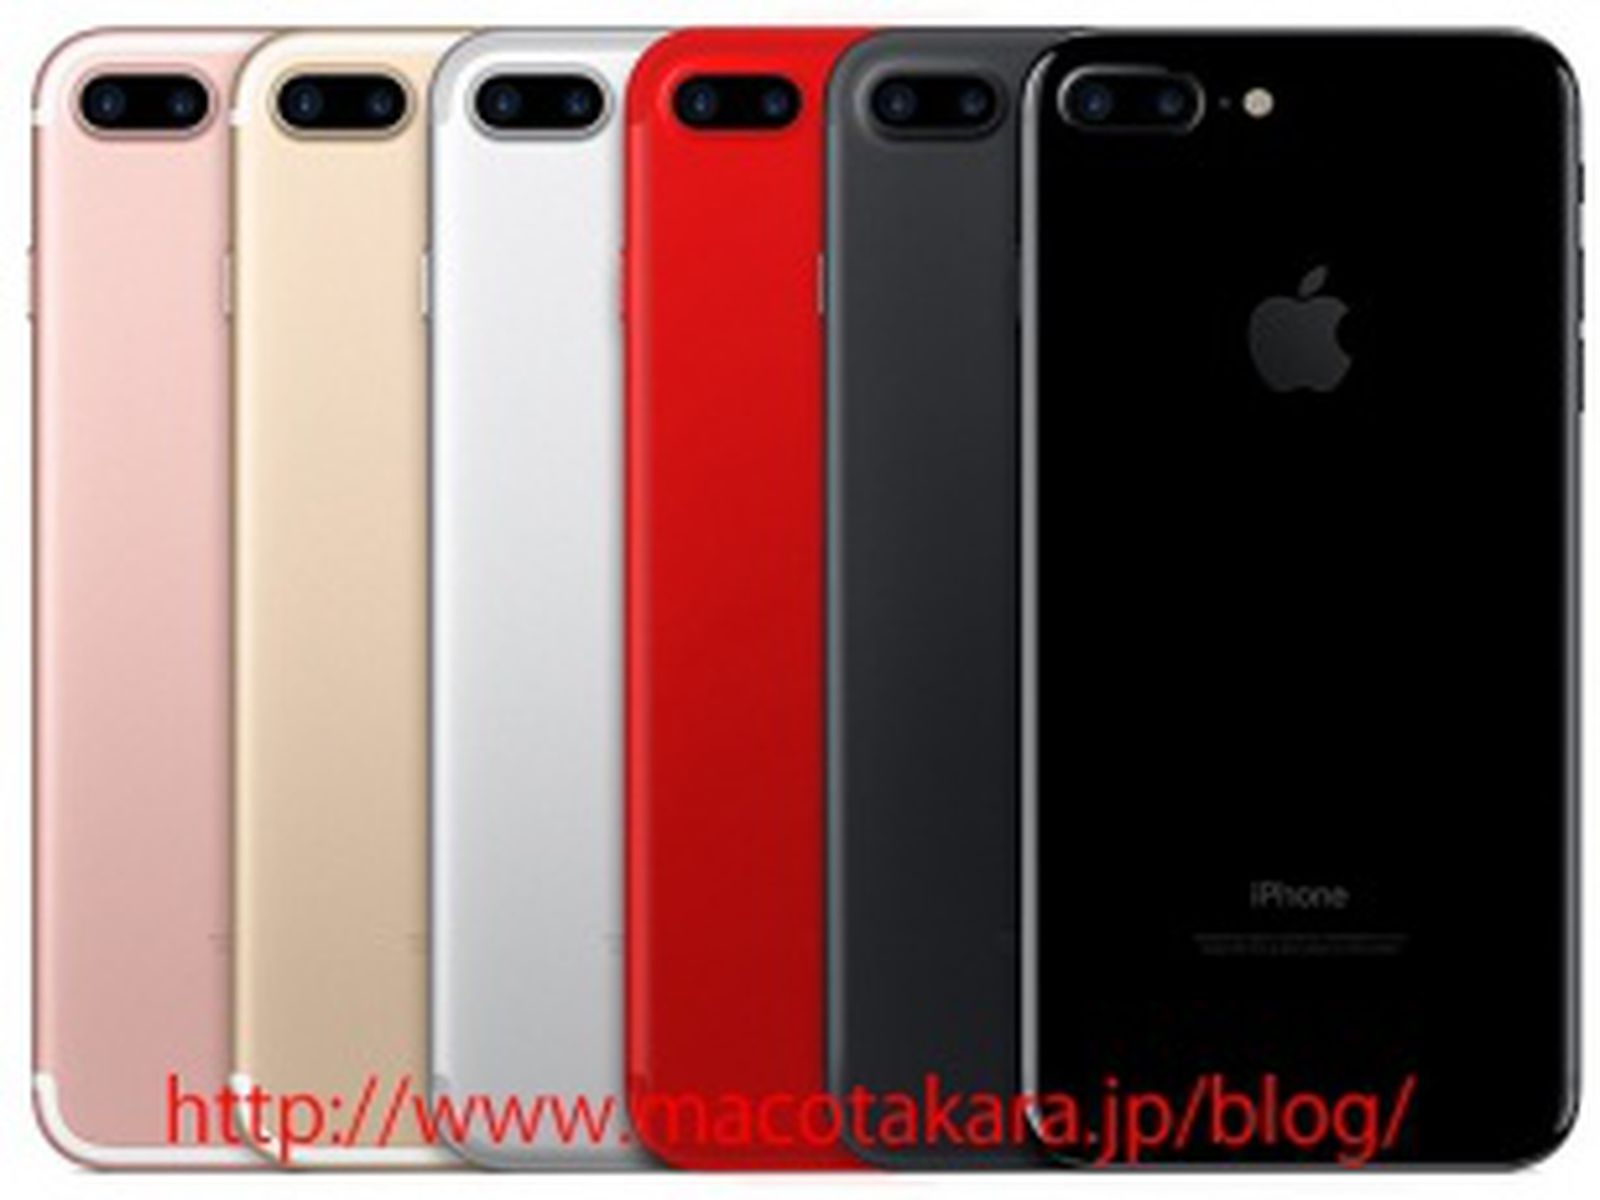 Iphone 7s And Iphone 7s Plus Said To Come In All New Red Color Lack New Design And Wireless Charging Macrumors